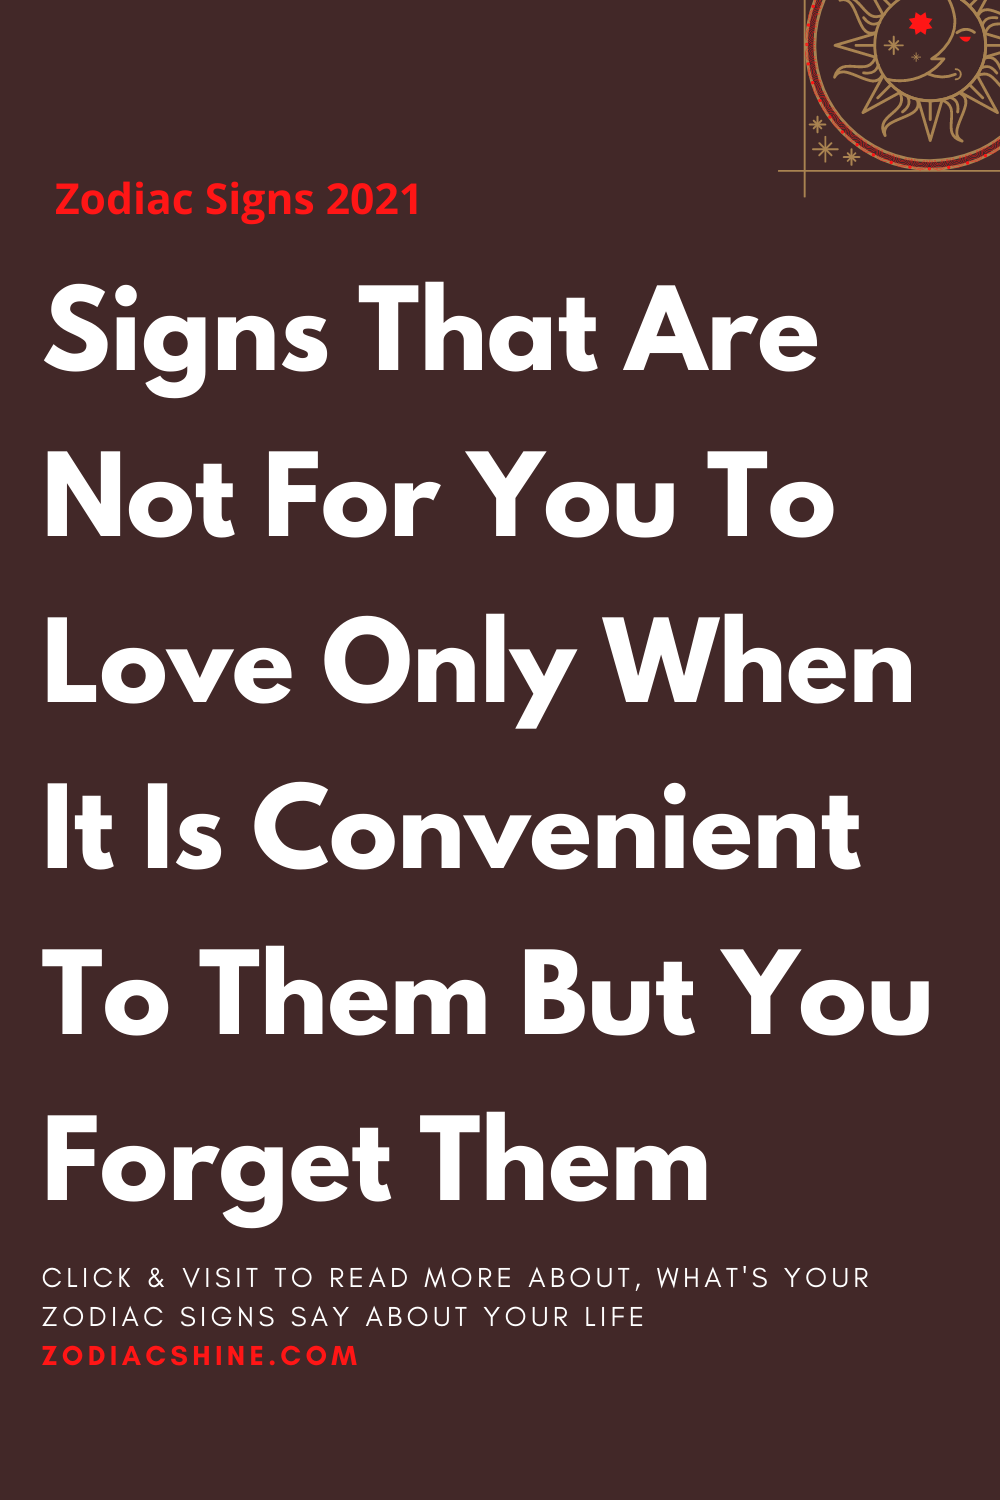 Signs That Are Not For You To Love Only When It Is Convenient To Them But You Forget Them